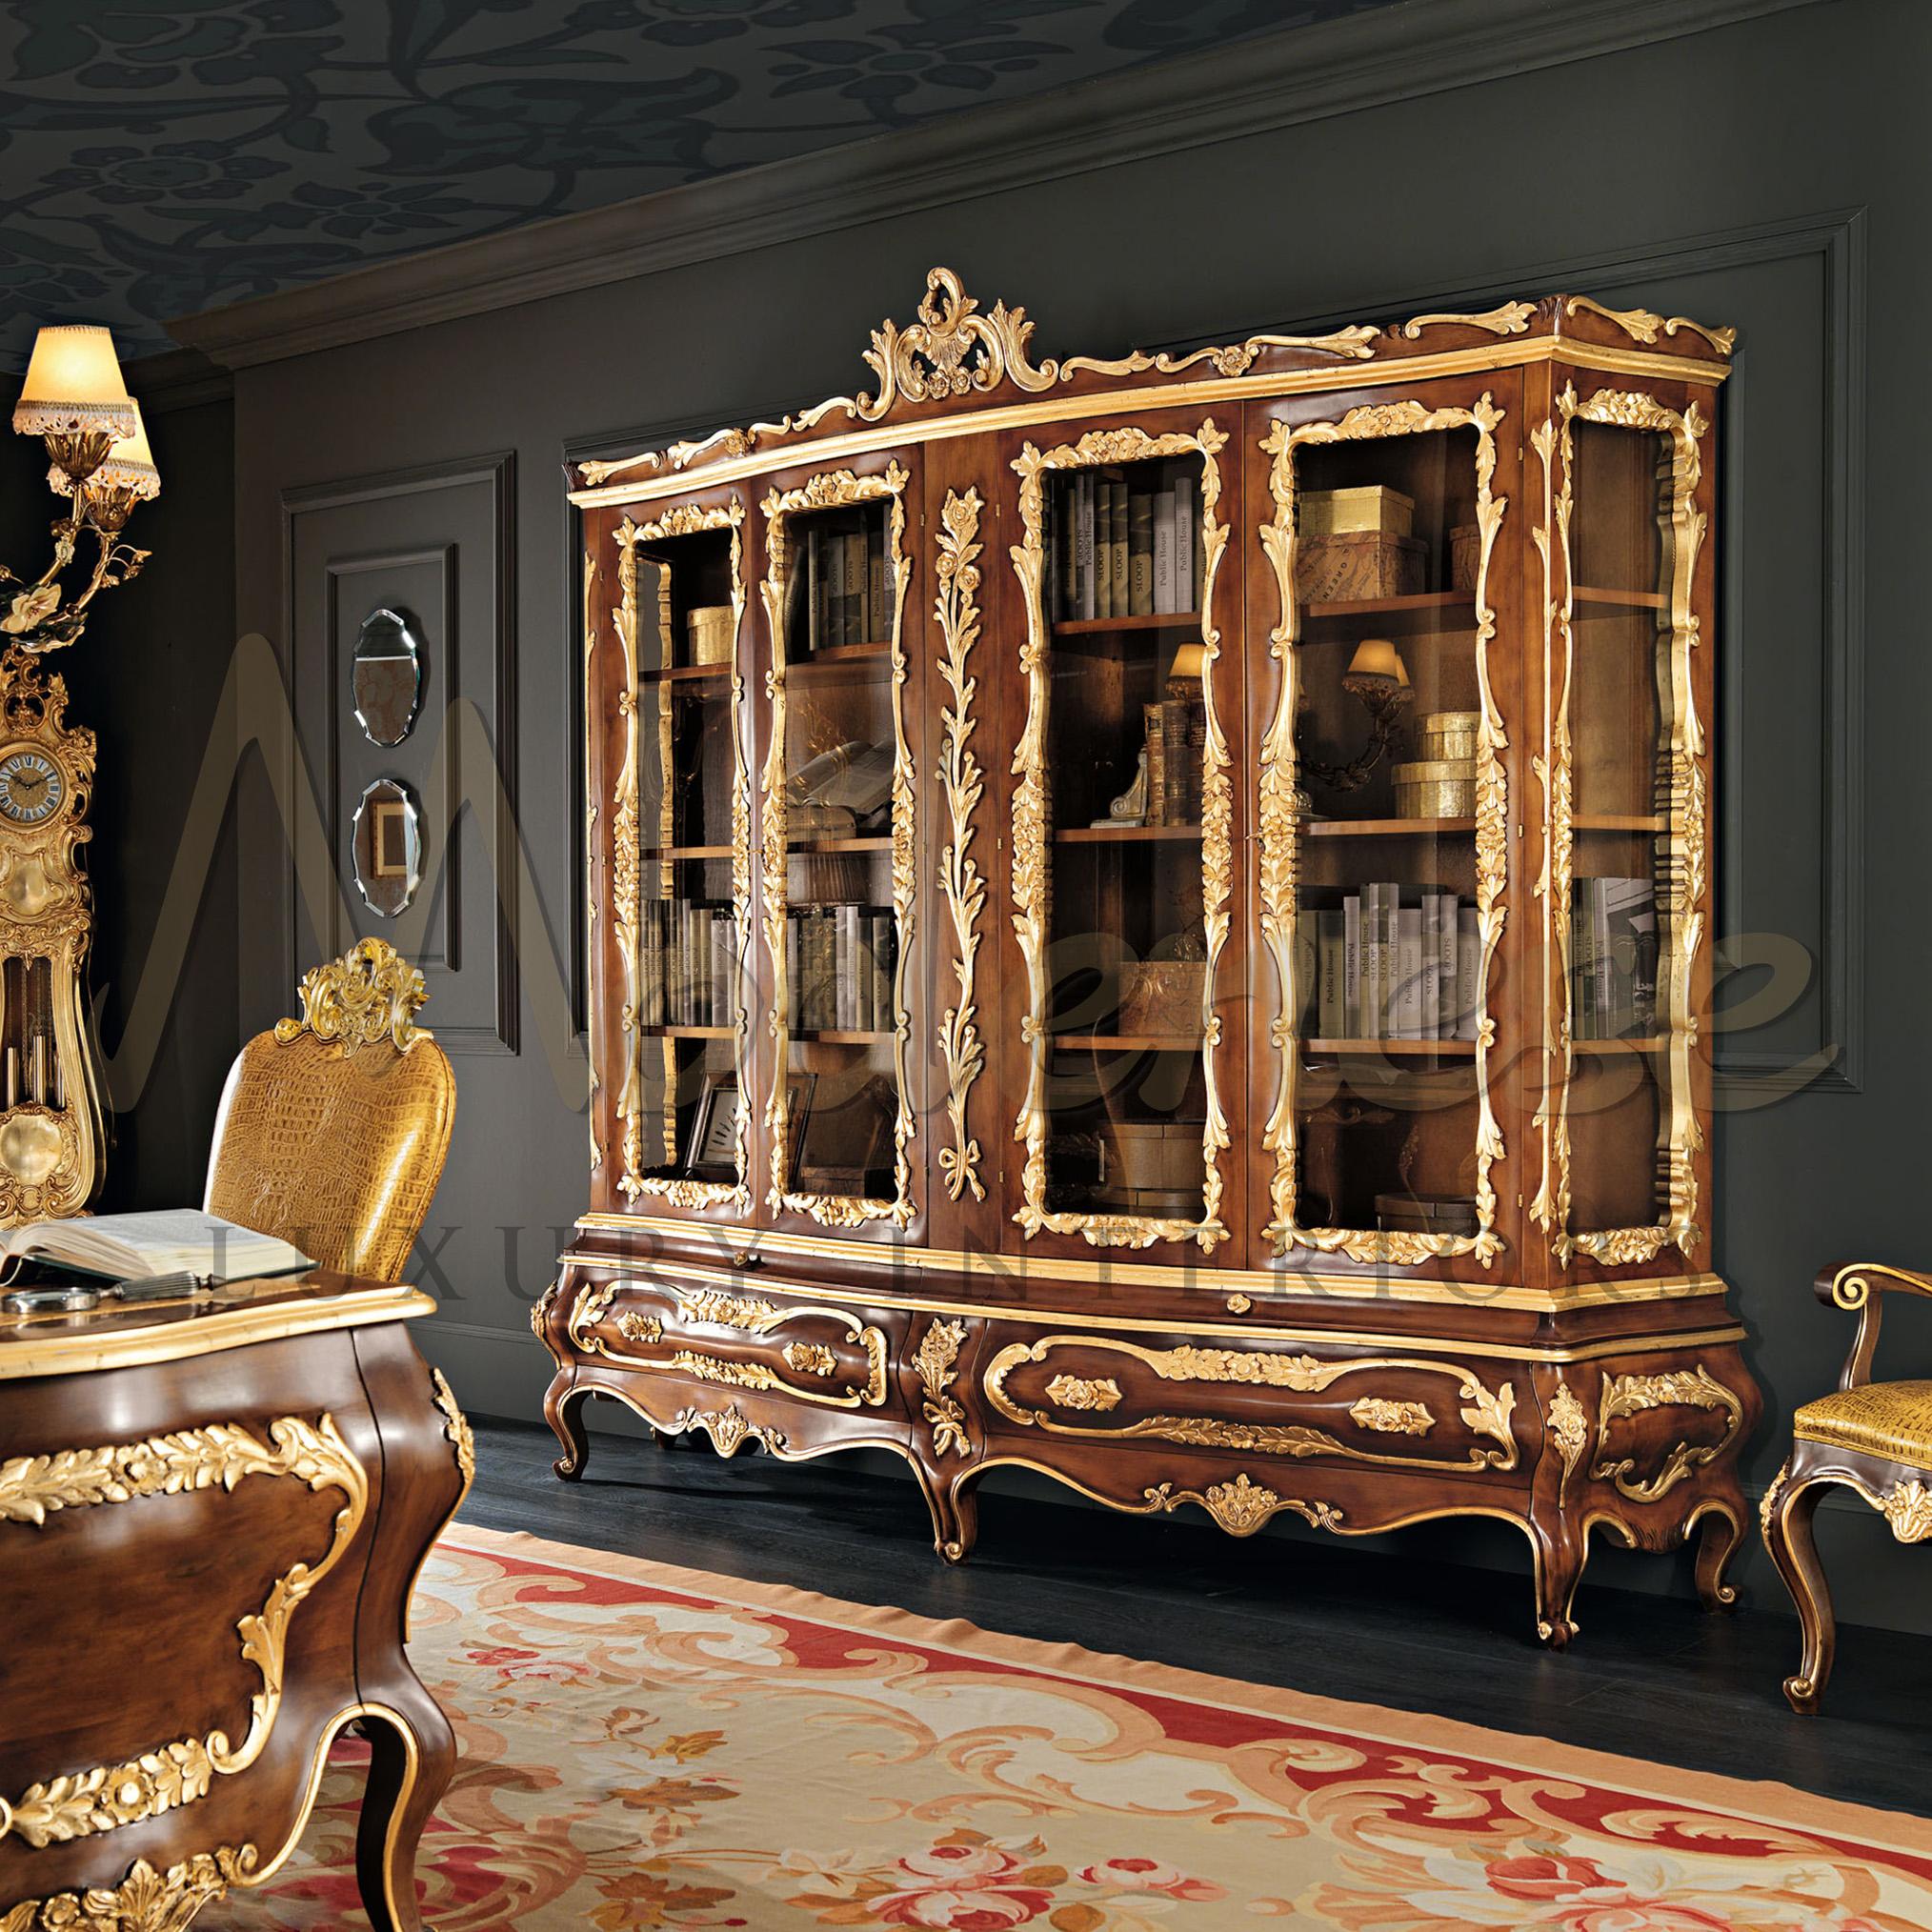 Modenese Gastone Interiors can be the perfect partner for your presidential project interior design. This high-end four door vitrine bookcase in solid wood, with natural finish and gold leaf hand decorated details, defintely has a baroque